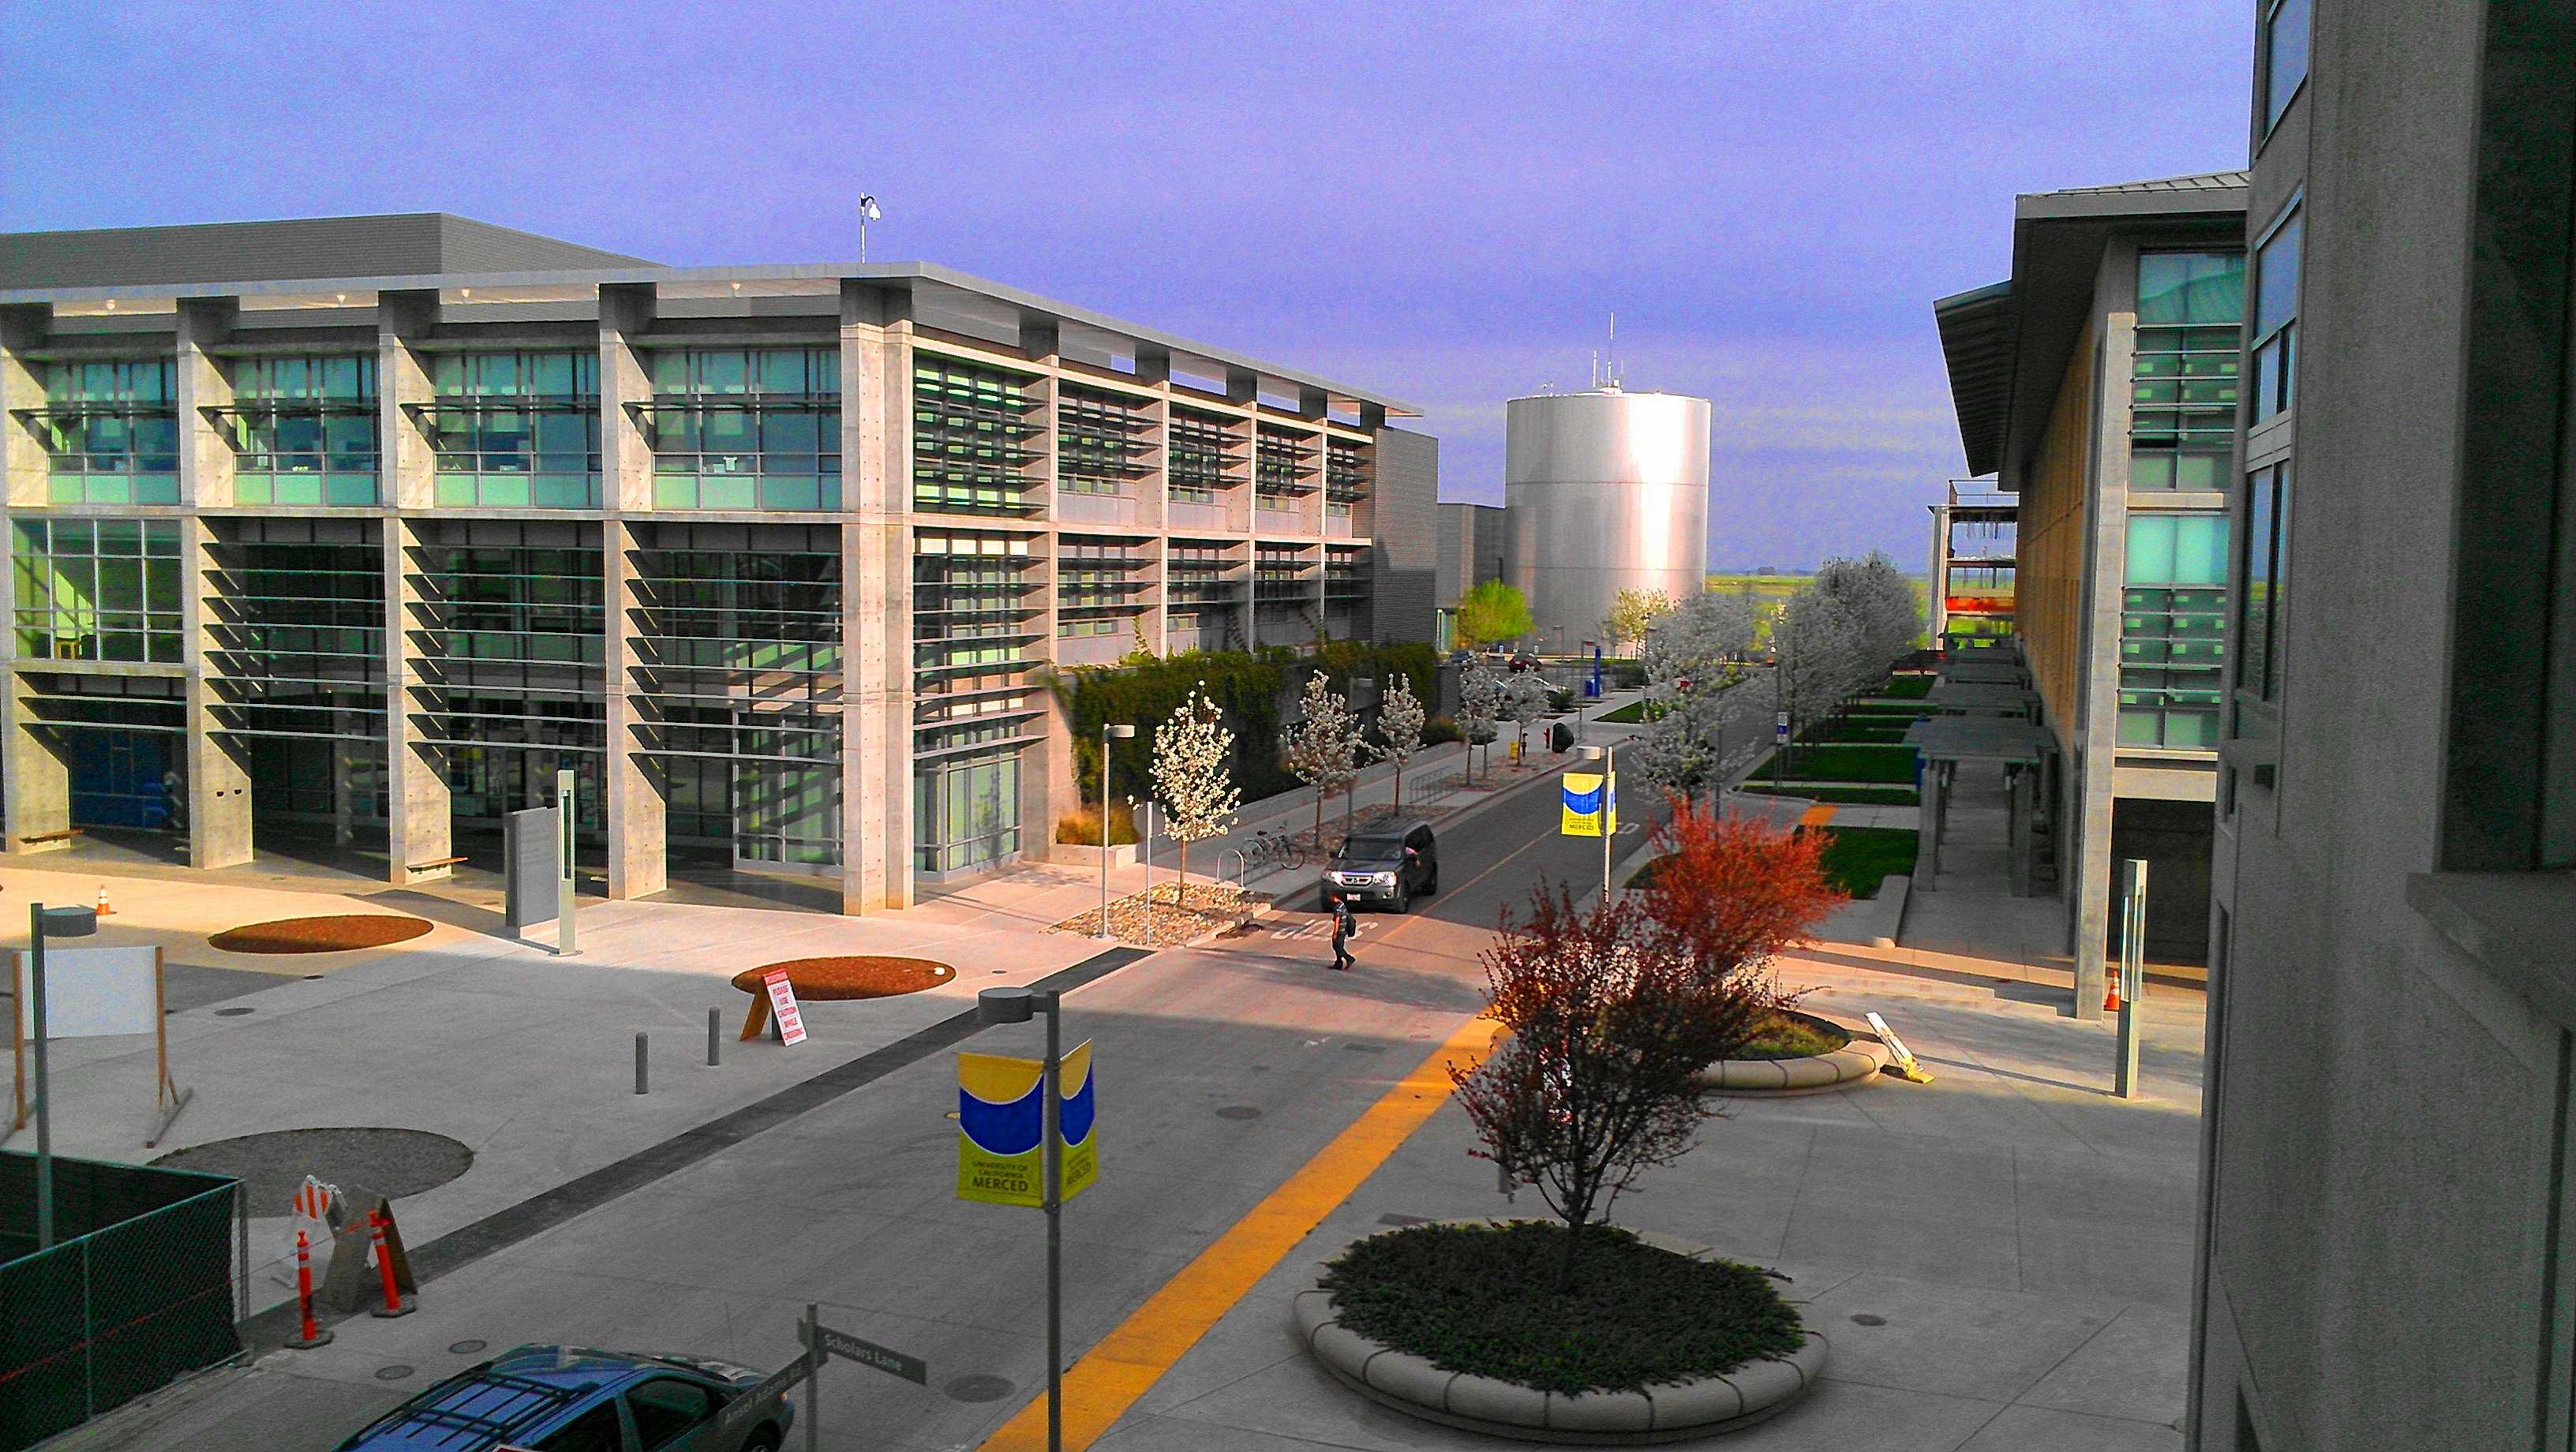 University of California Merced - Admission Requirements, SAT, ACT, GPA and  chance of acceptance